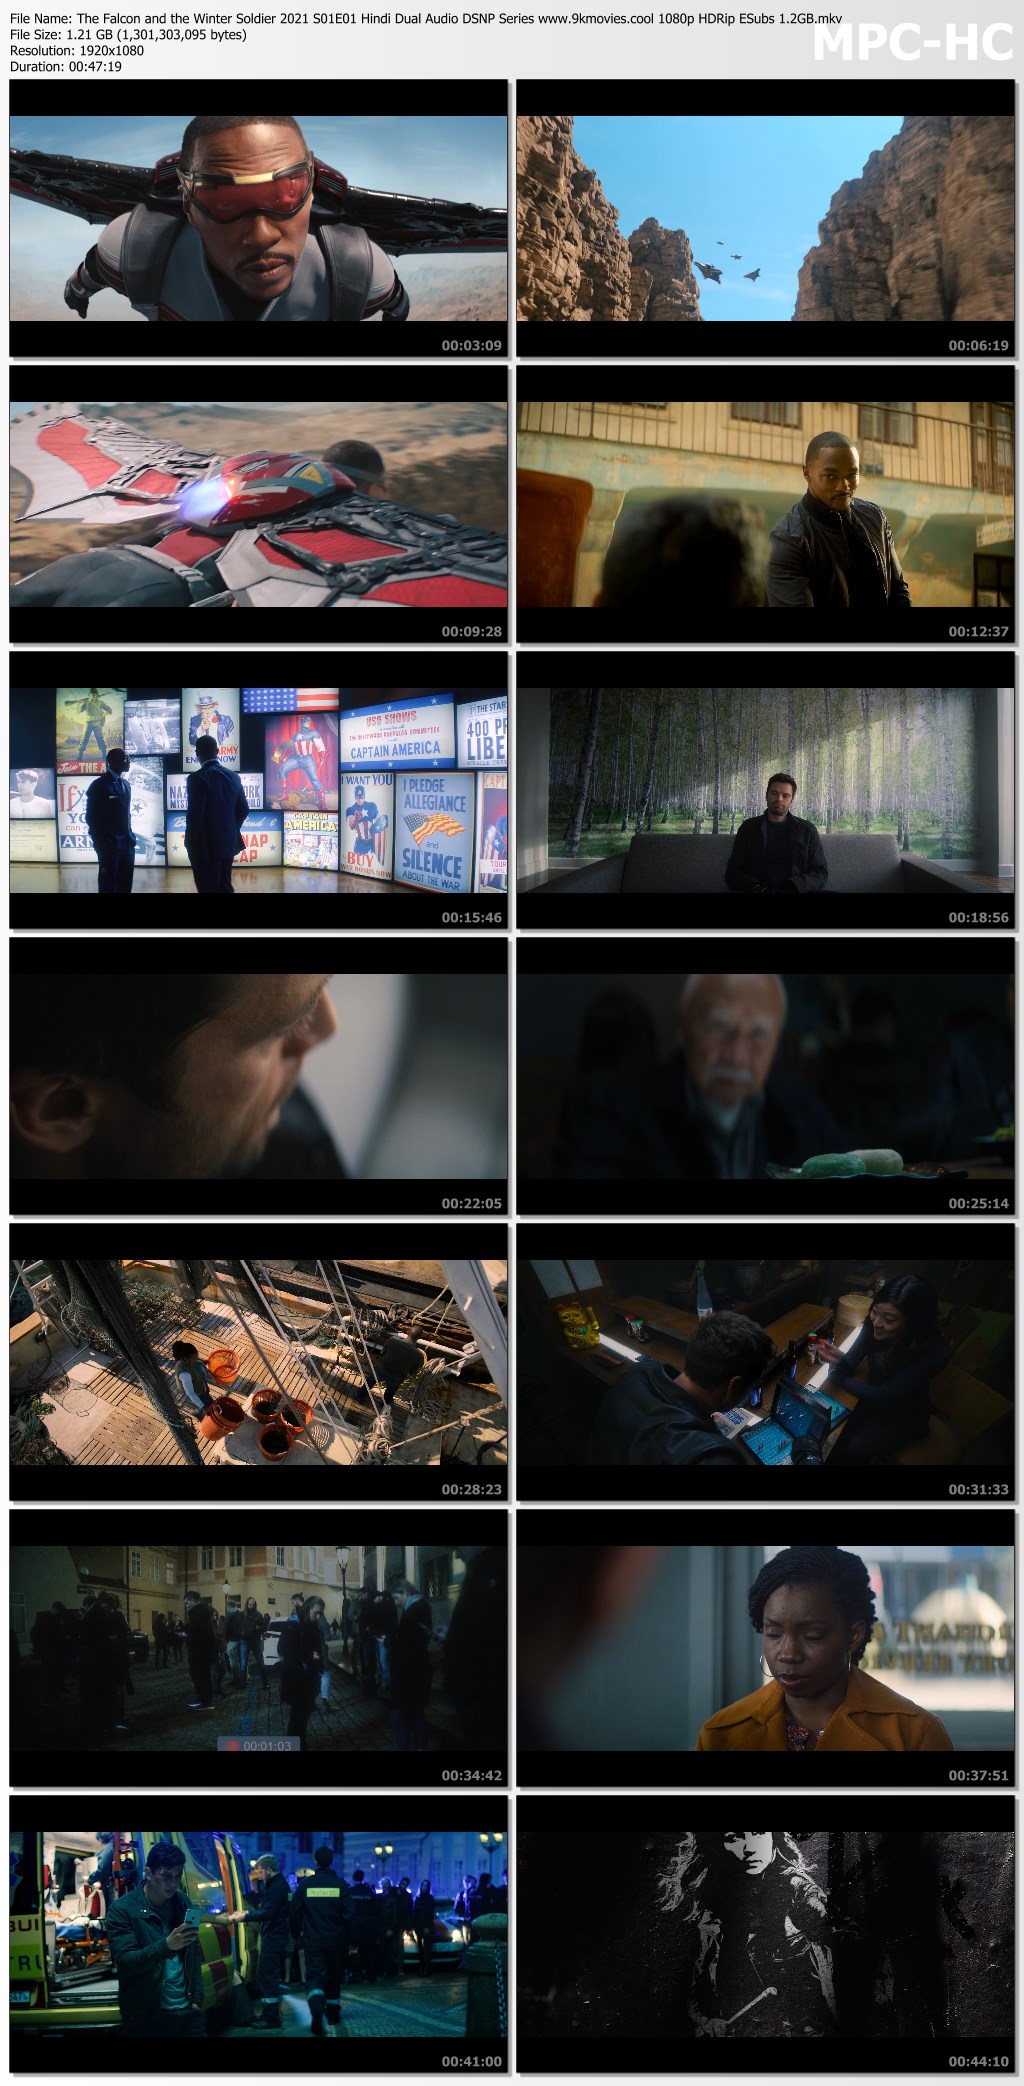 The Falcon and the Winter Soldier 2021 S01E01 Hindi Dual Audio DSNP Series 1080p HDRip ESubs 1 ...